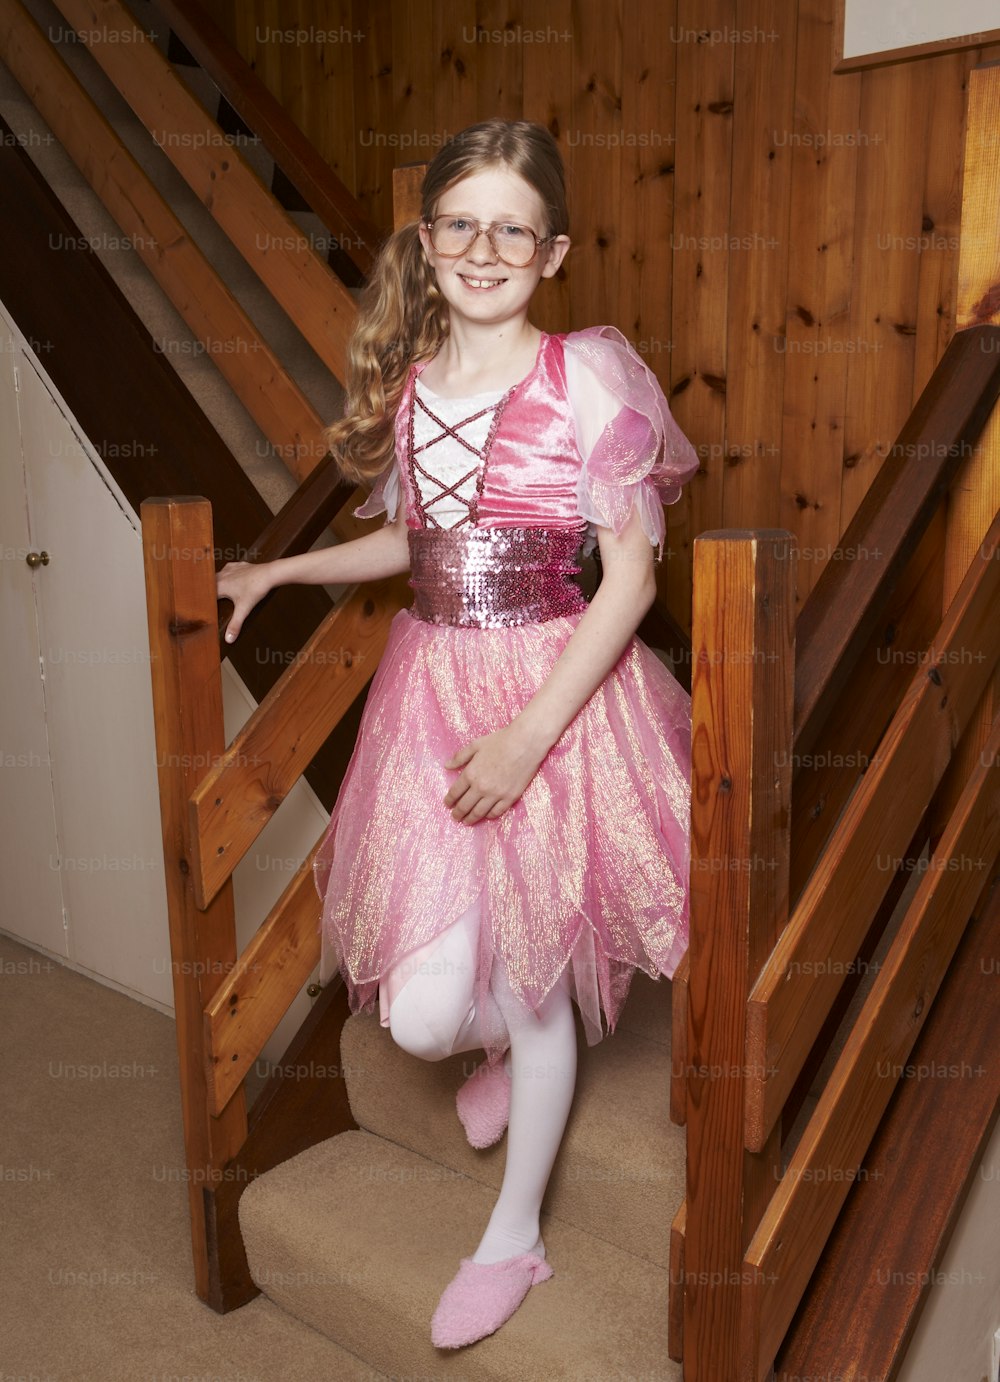 a little girl in a pink dress standing on some stairs